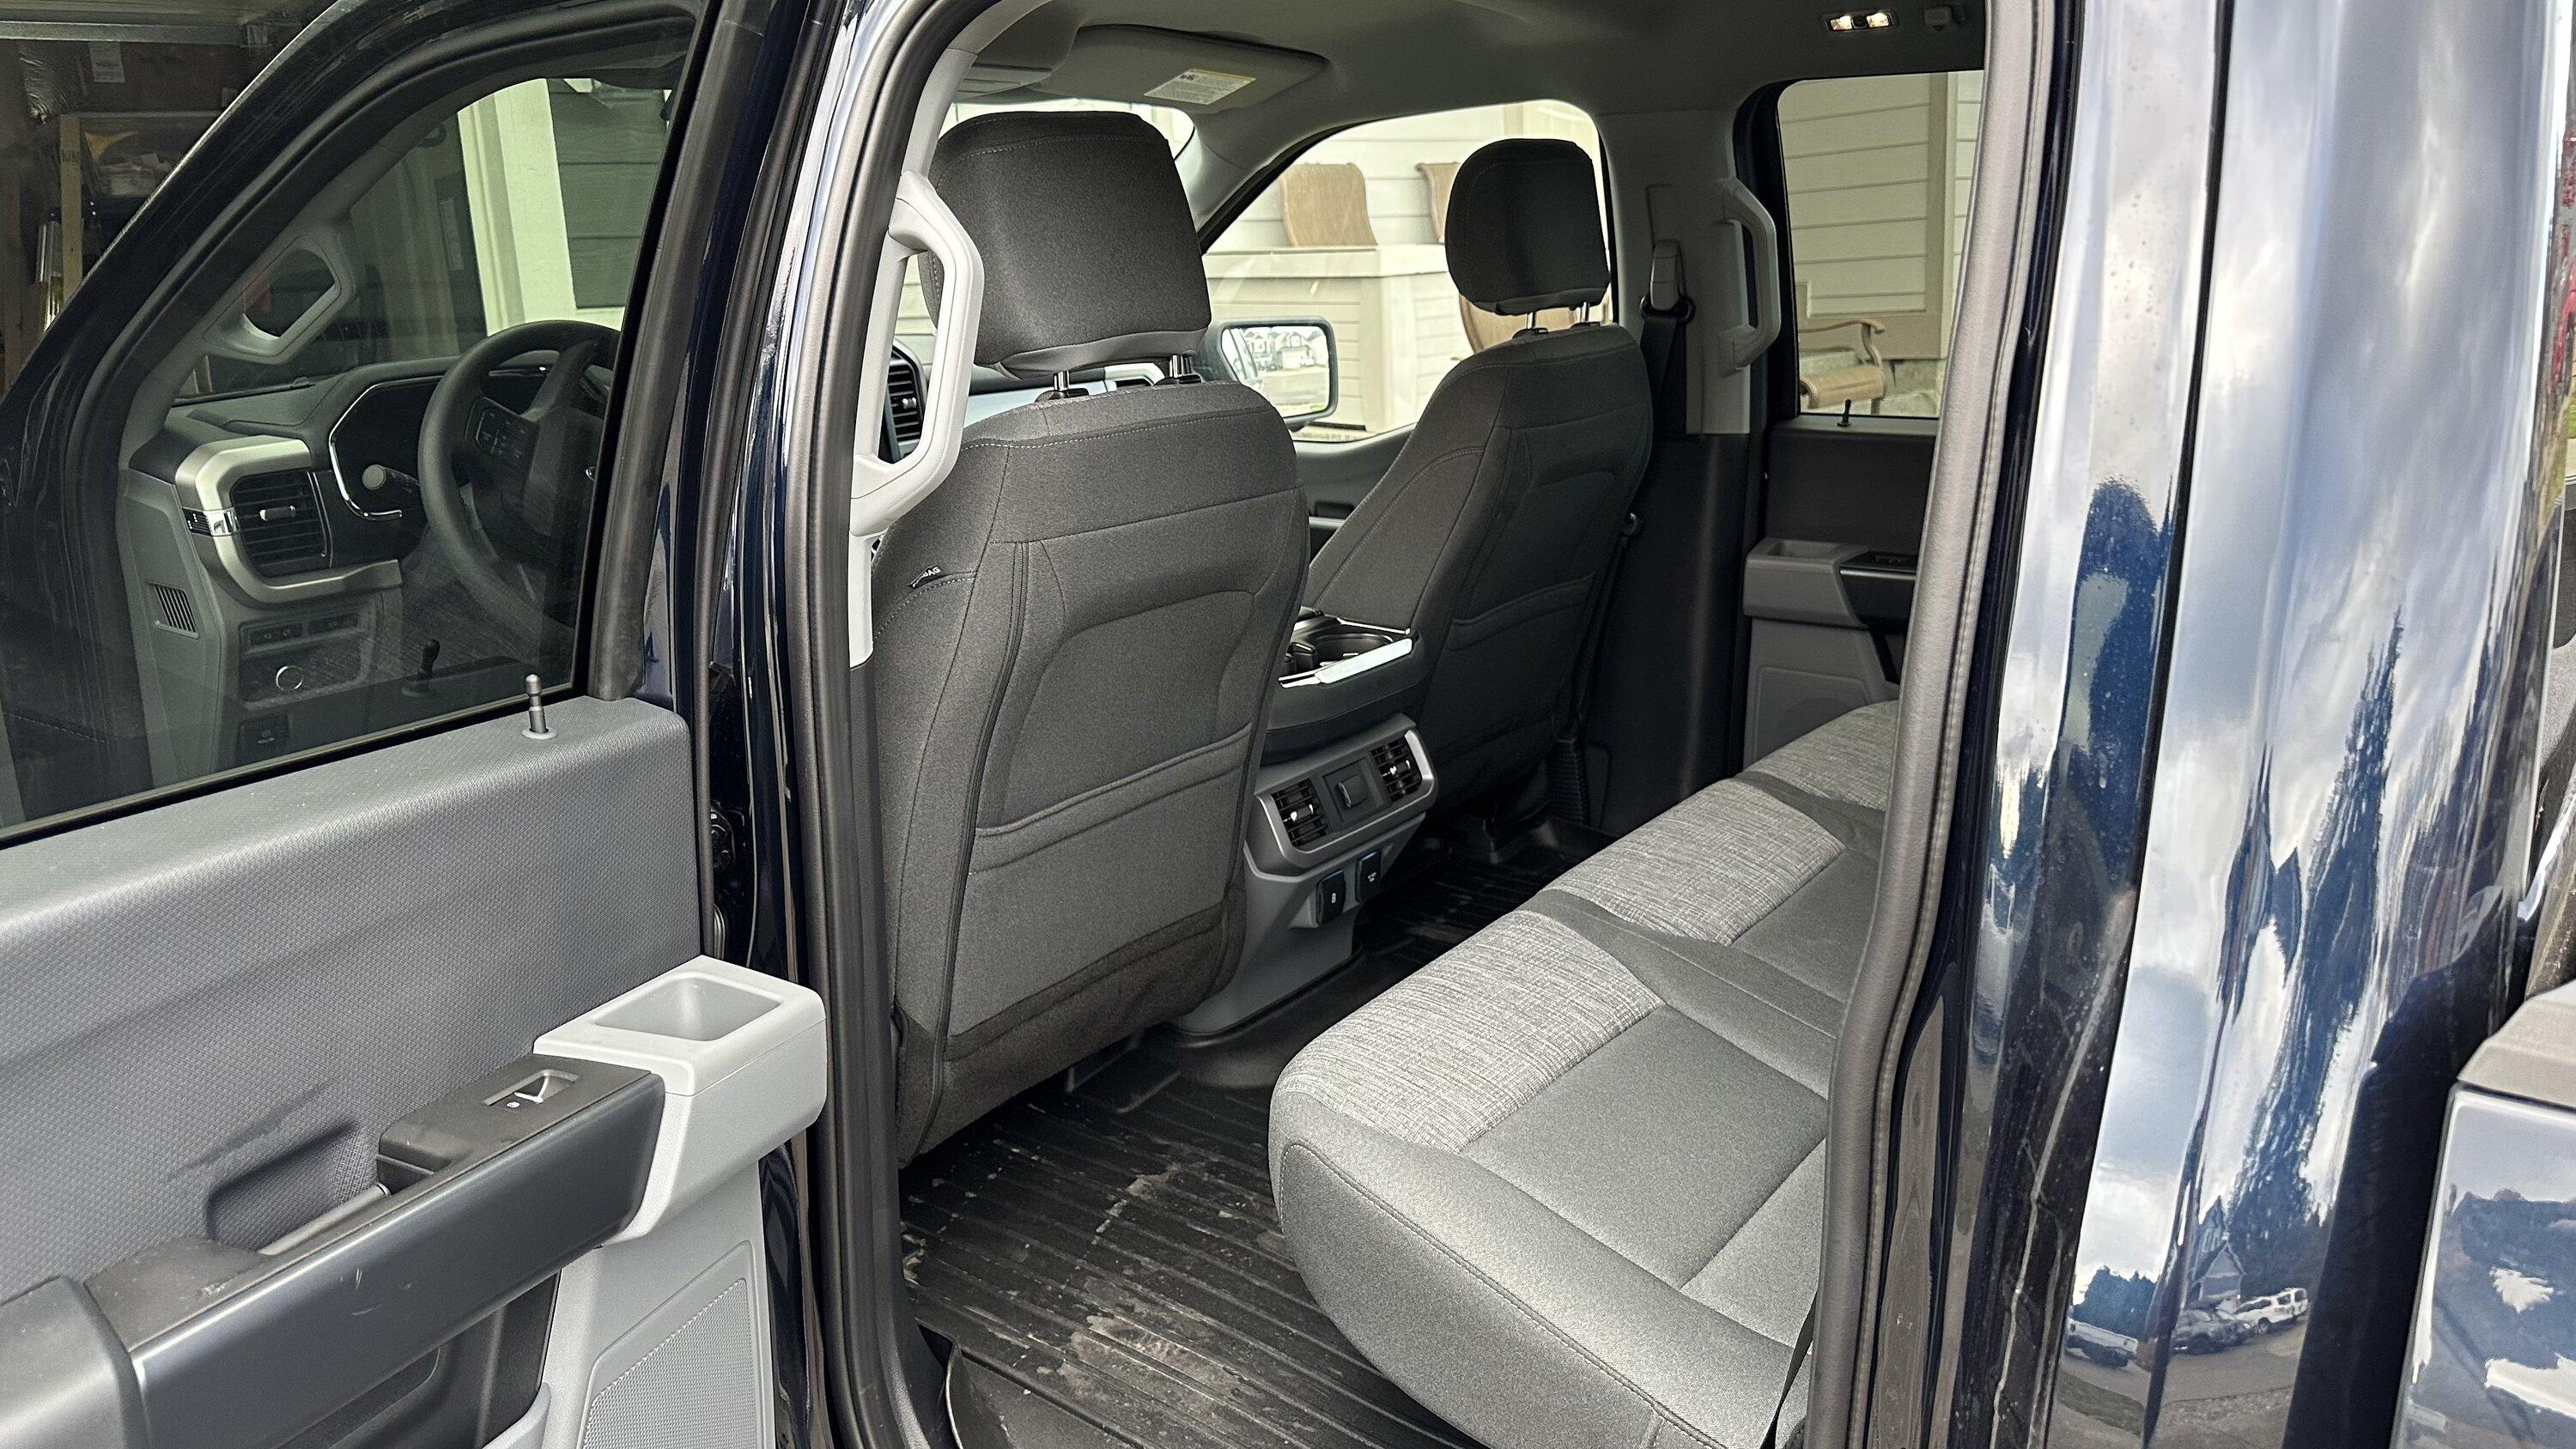 Ford F-150 Lightning Changed Pro Seats to XLT Seats by changing OEM seat covers IMG-5726